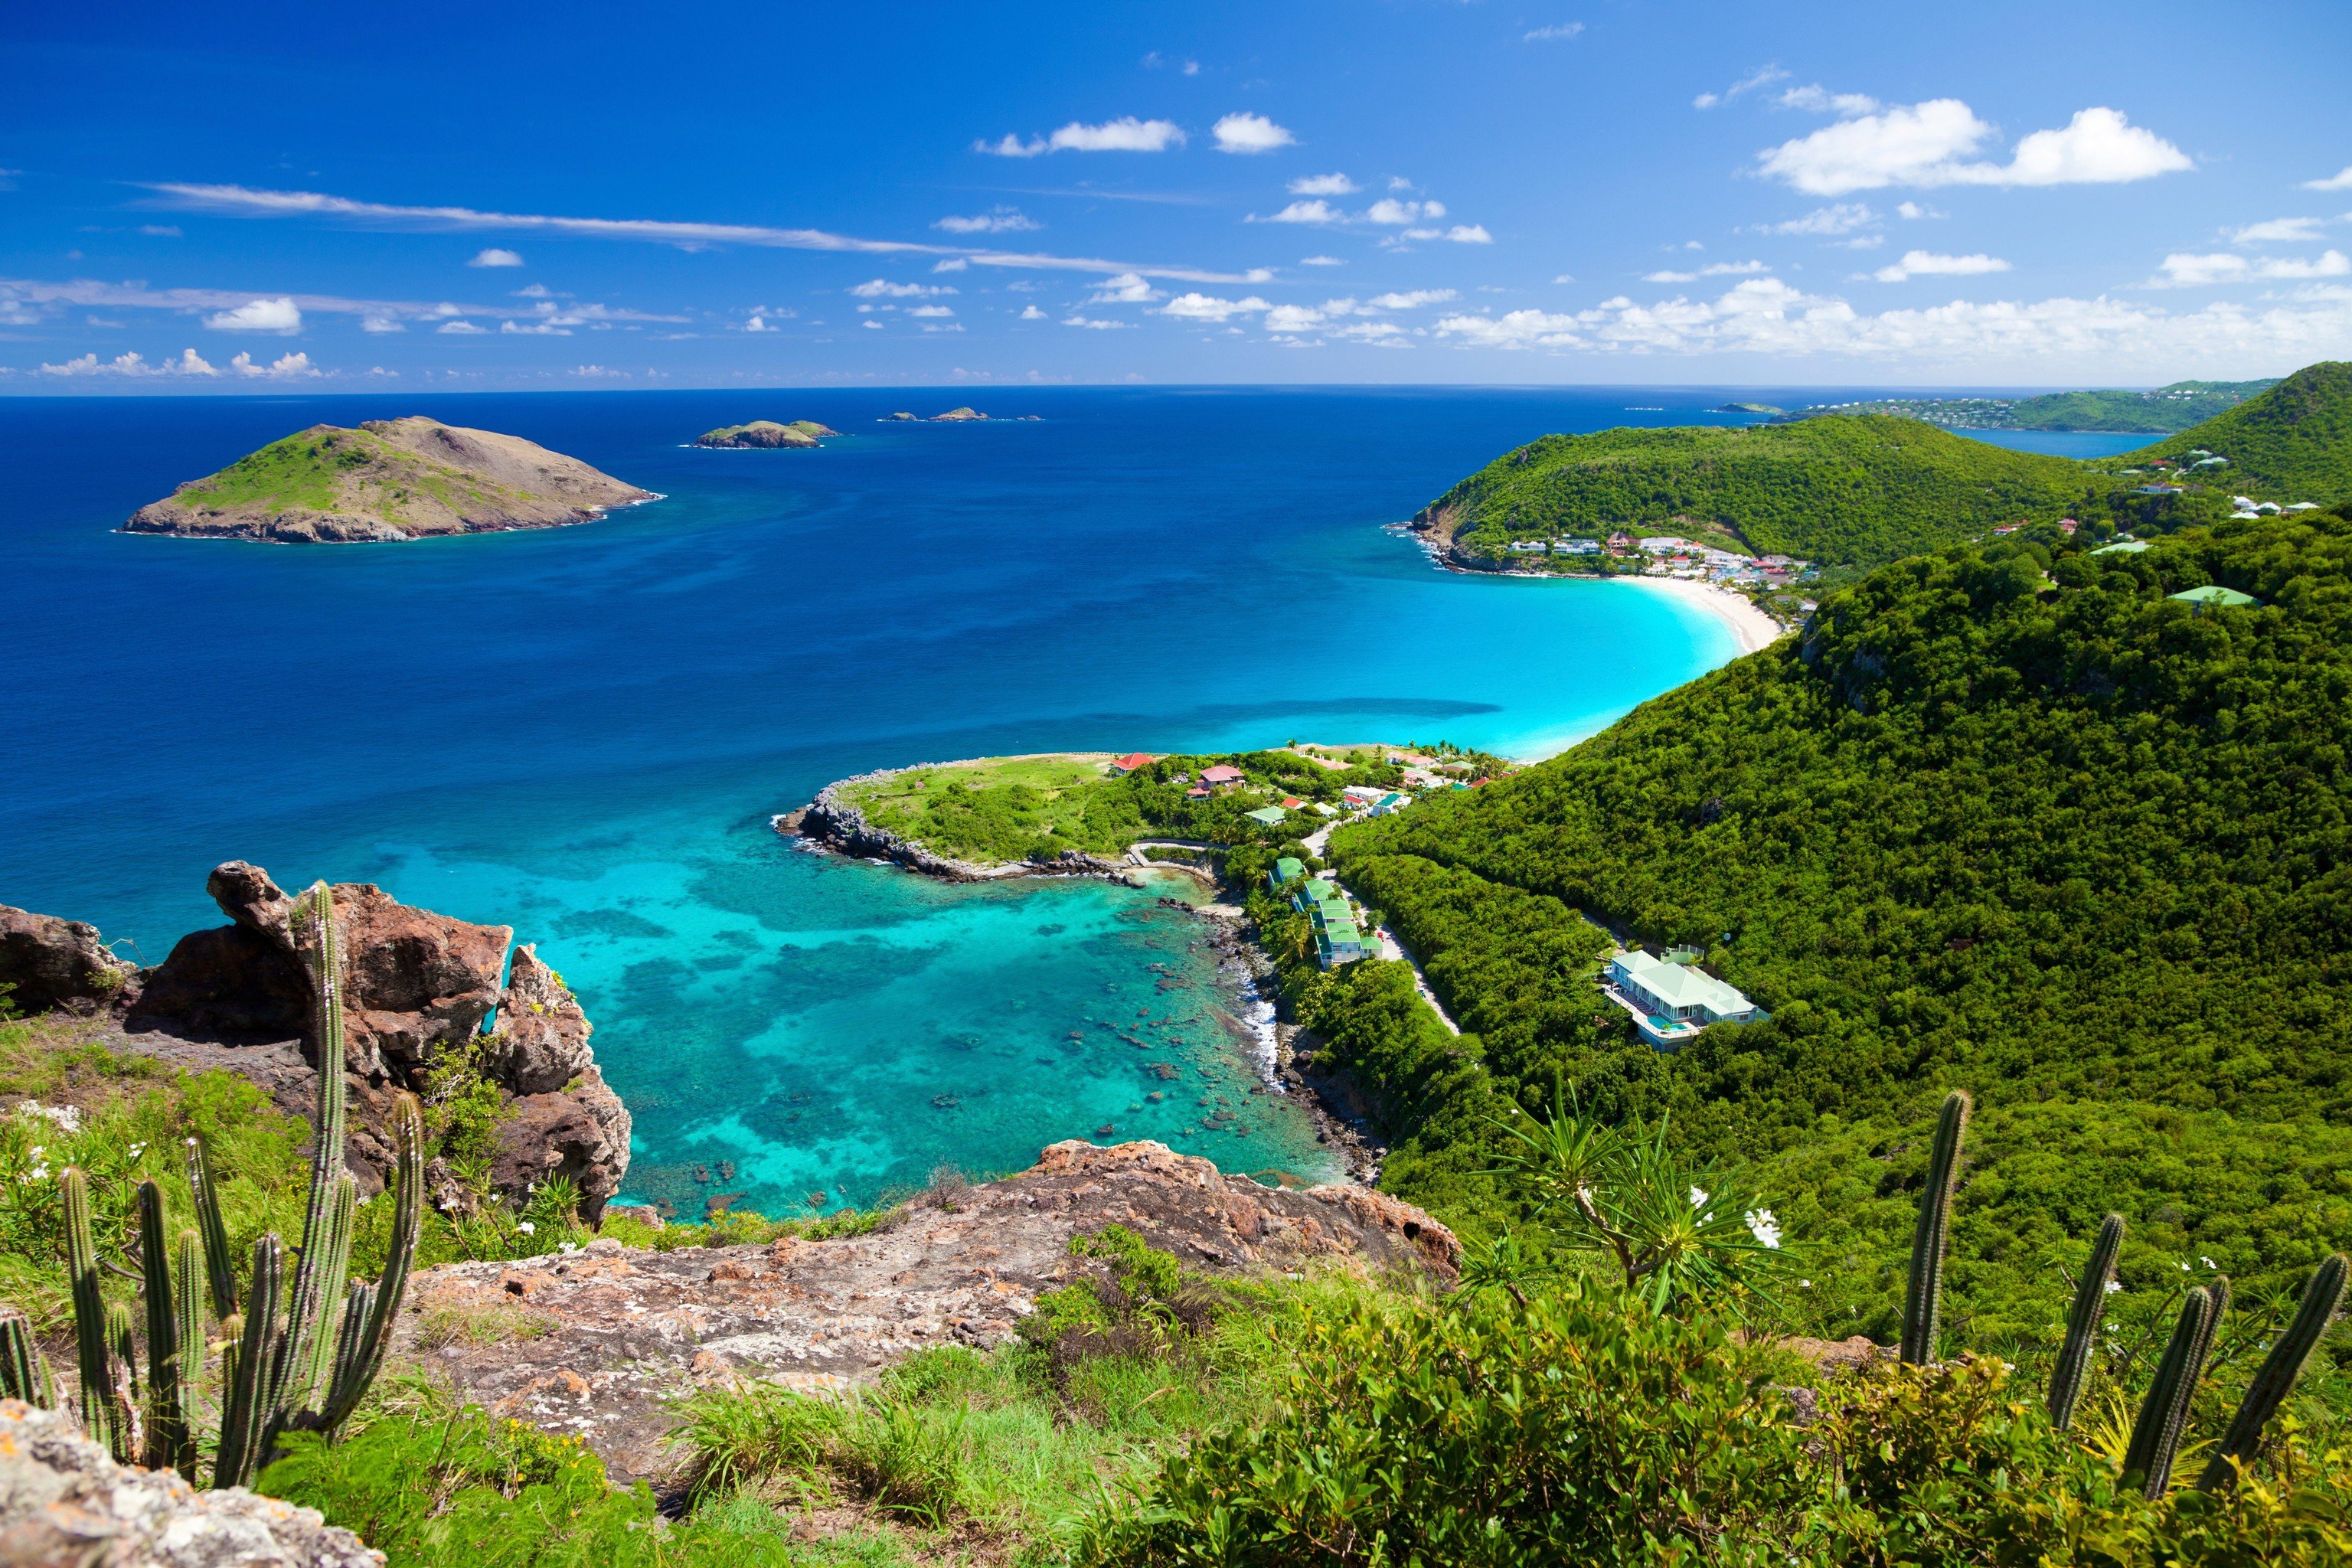 14 BEST Things to Do in St. Barts Now (2019) Jetsetter